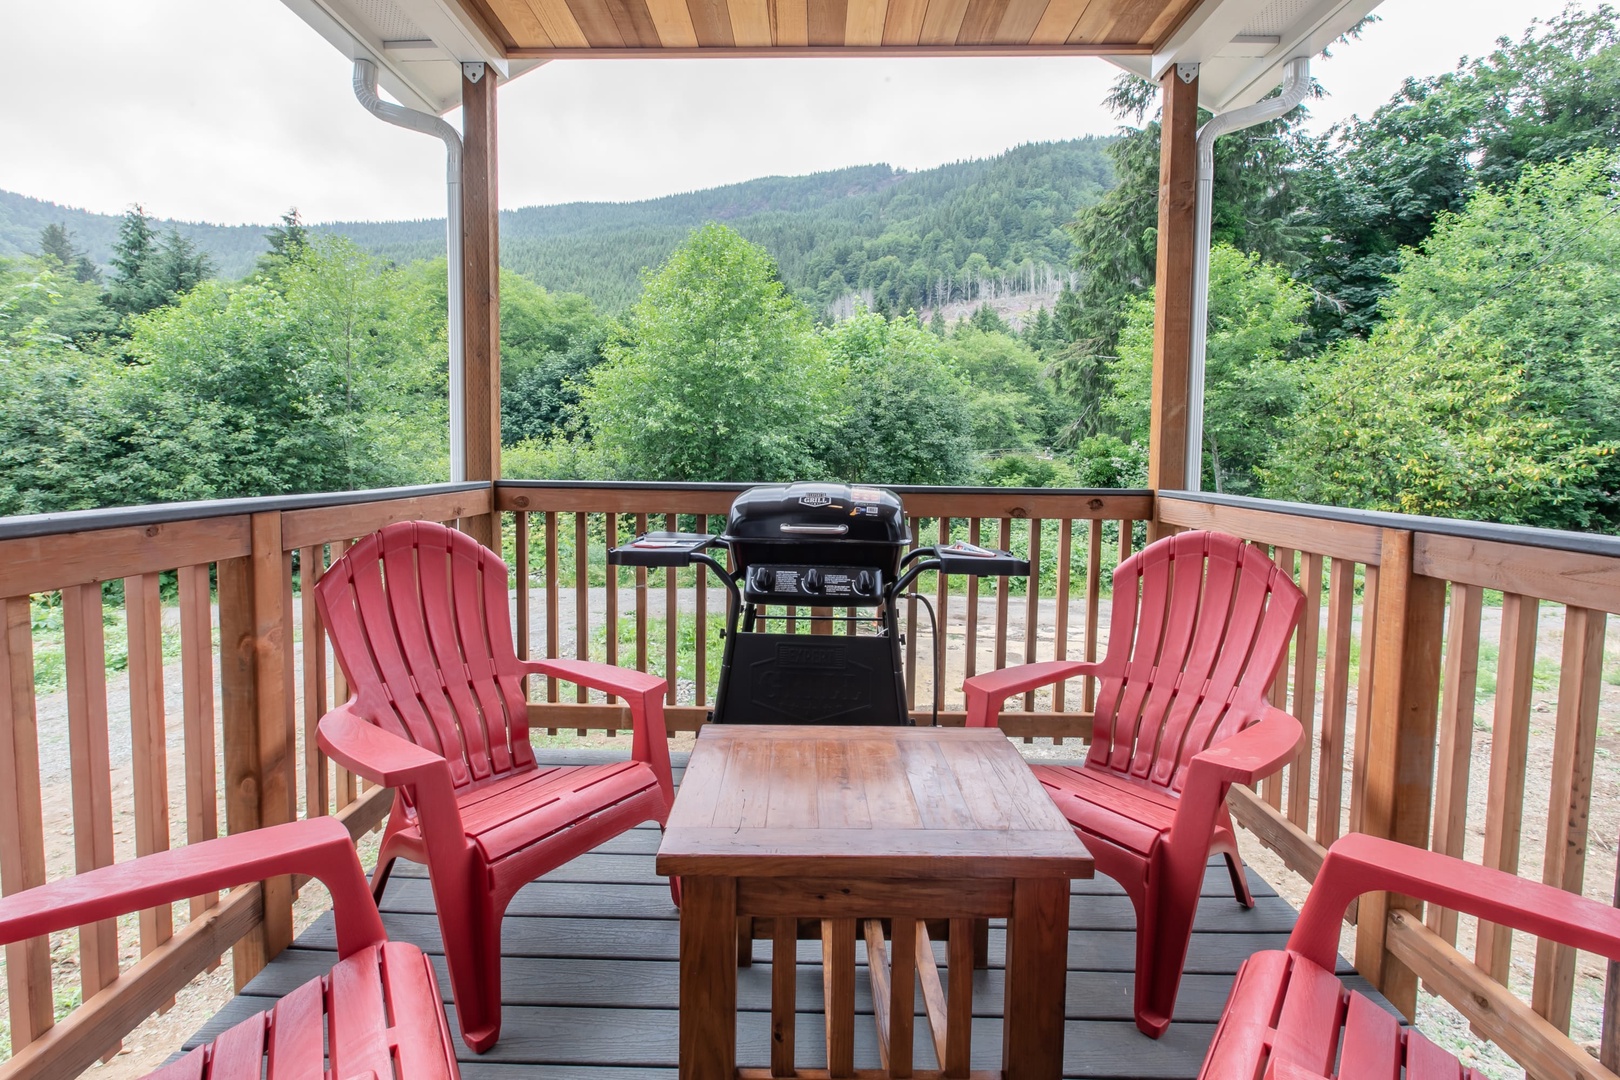 Nehalem Vacation Rentals, Nehalem Coastal Oasis - Patio/BBQ area on the front deck to grill some steak